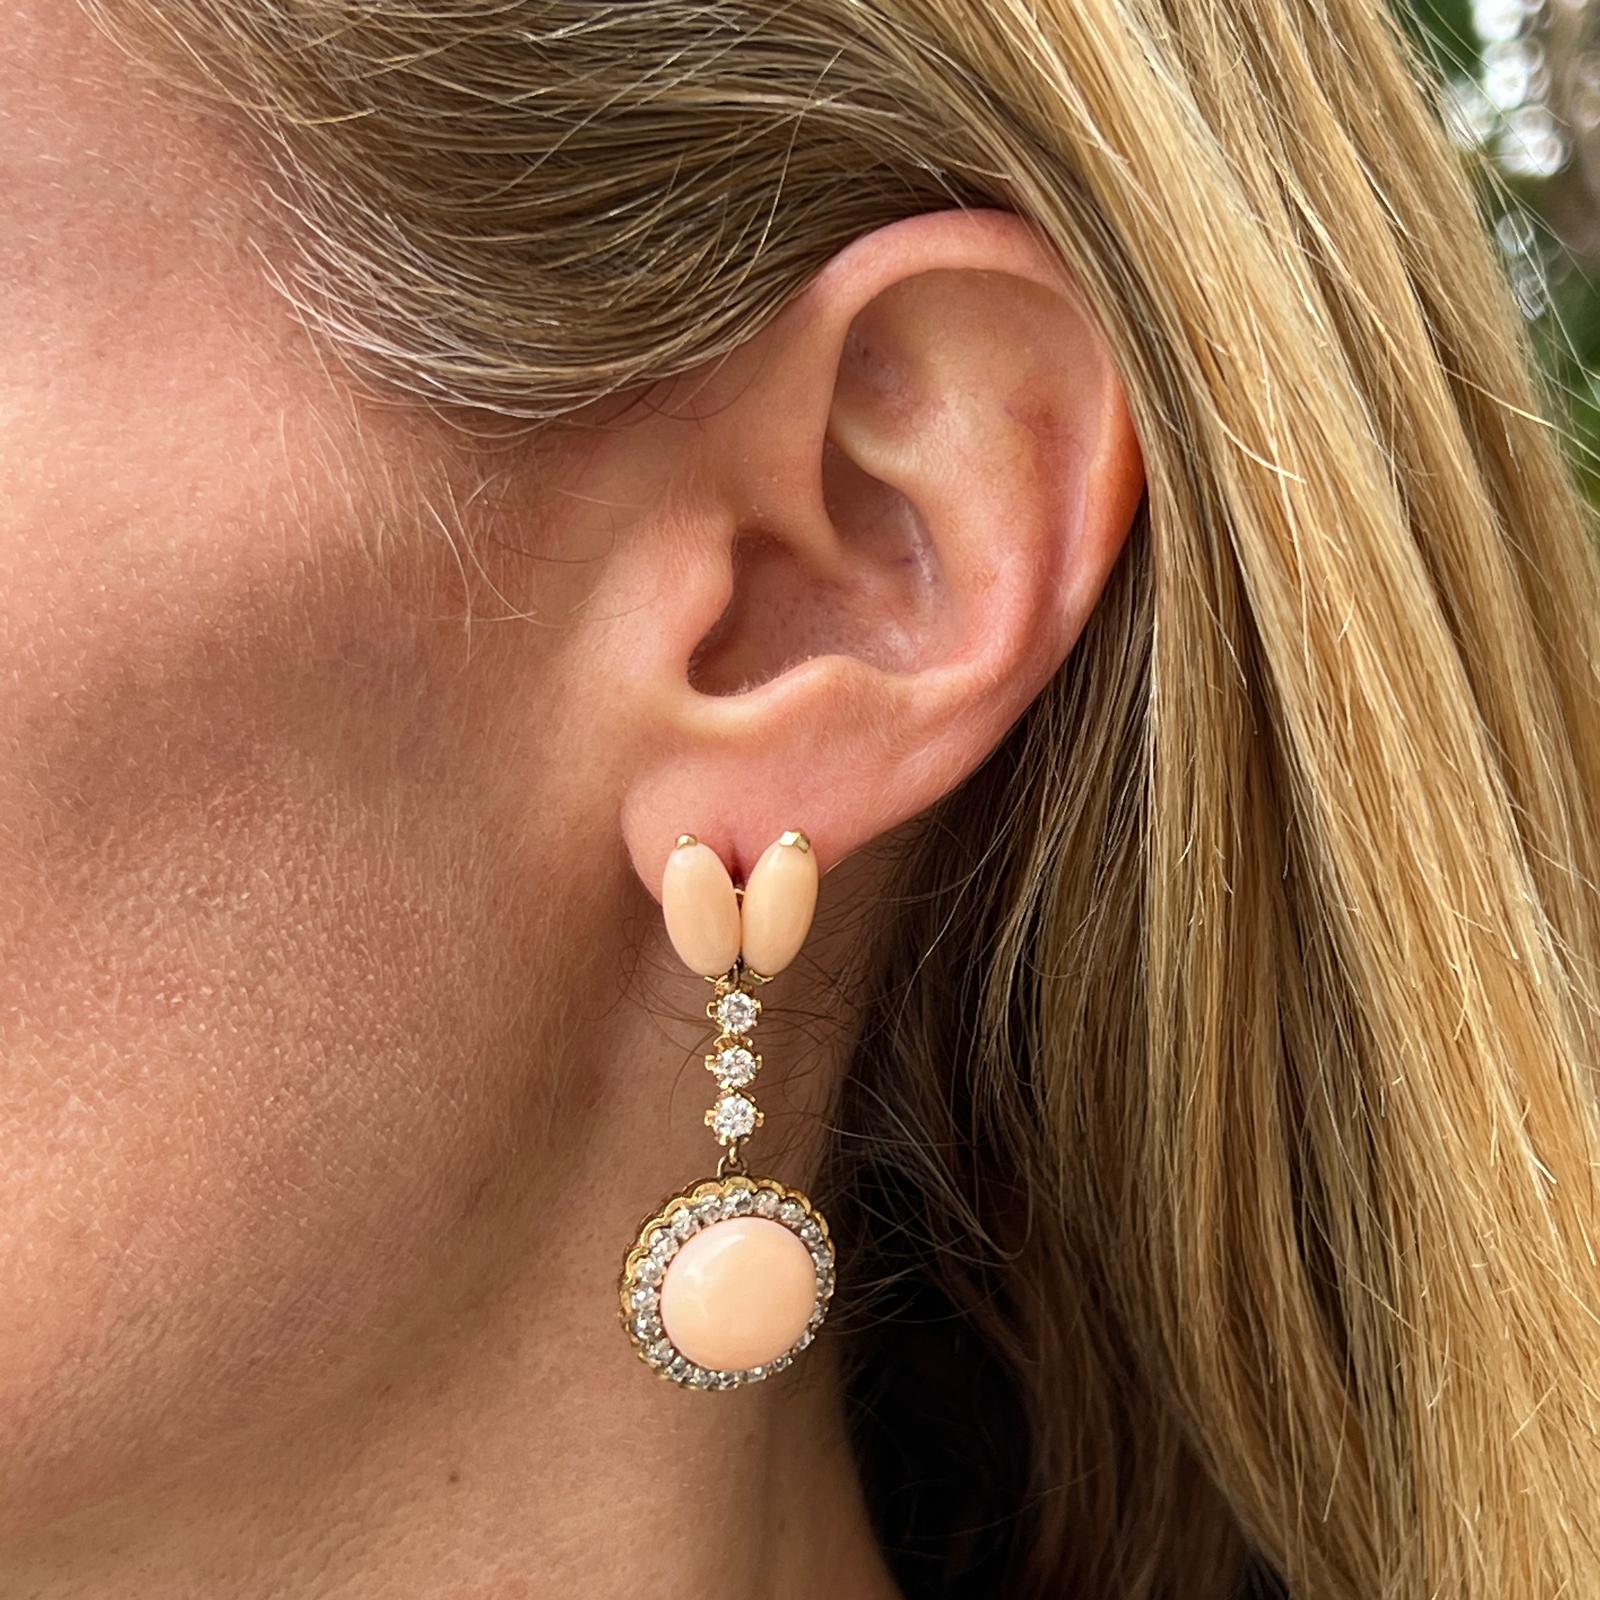 Beautiful coral and diamond vintage drop earrings crafted in 14 karat yellow gold. The earrings feature angel skin coral gemstone and round brilliant and rose cut diamonds. The 96 diamonds weigh approximately 1.00 carat total weight and are graded